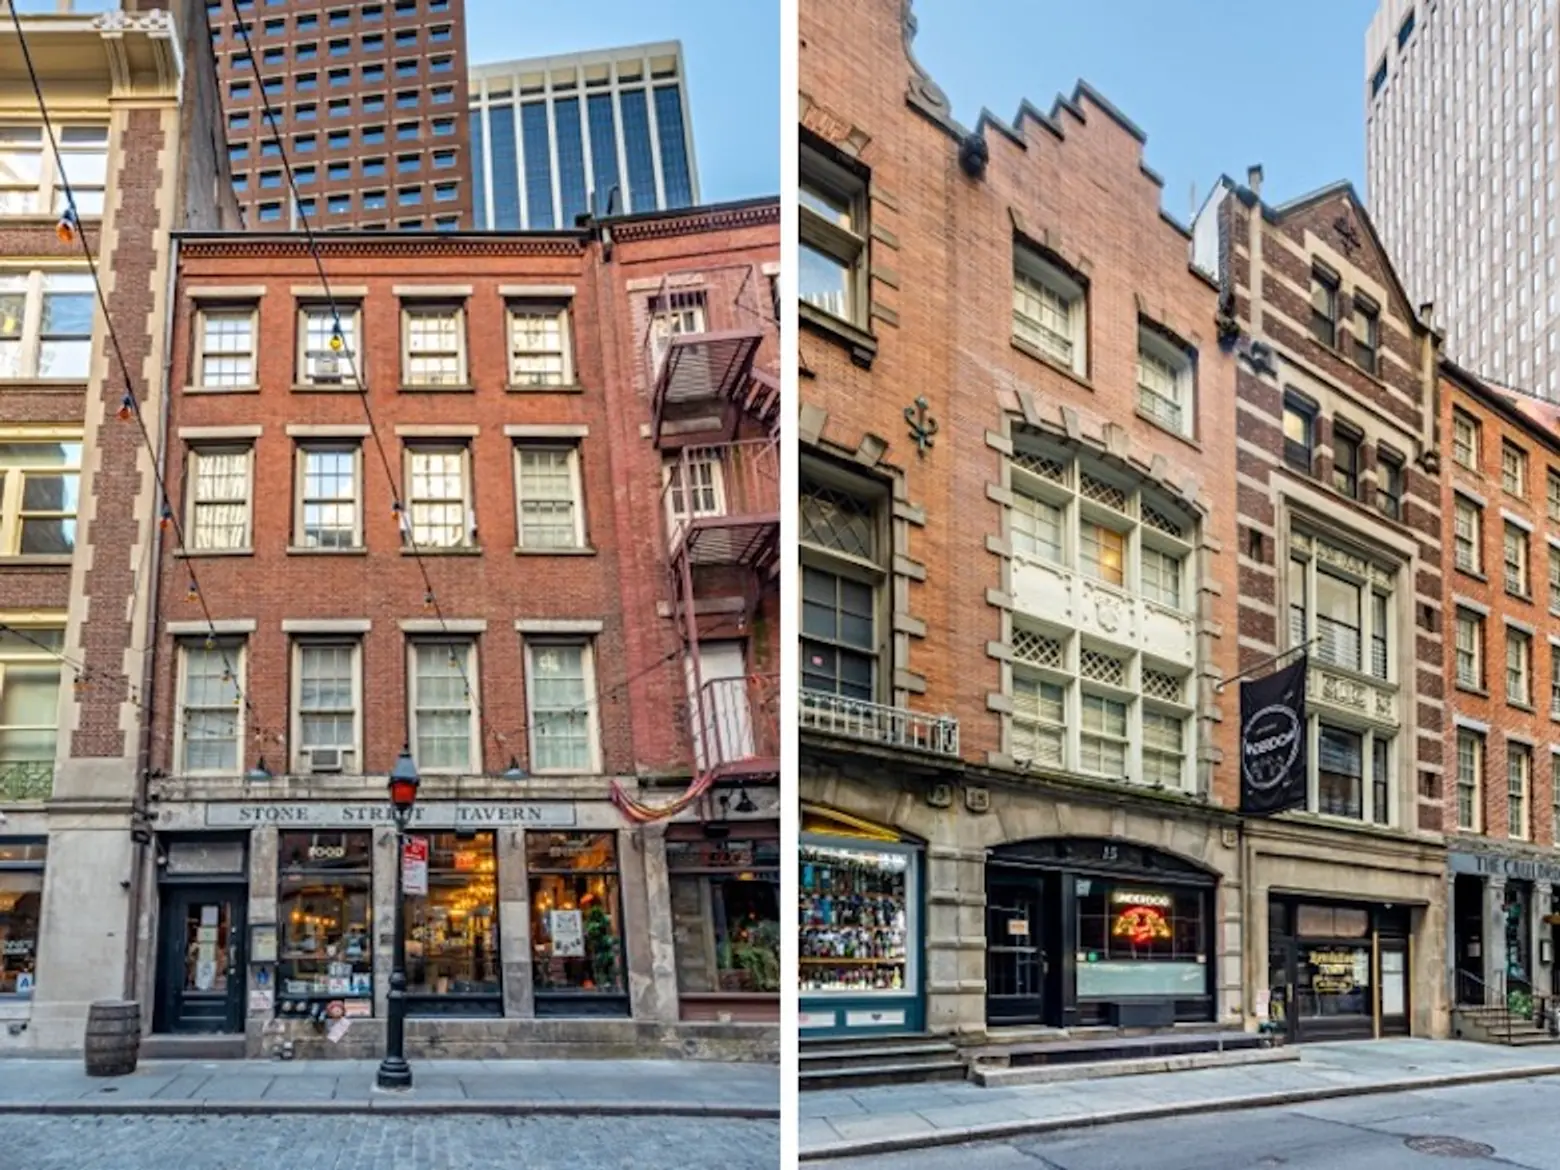 Three mixed-use buildings on historic Stone Street in FiDi ask $20.8M